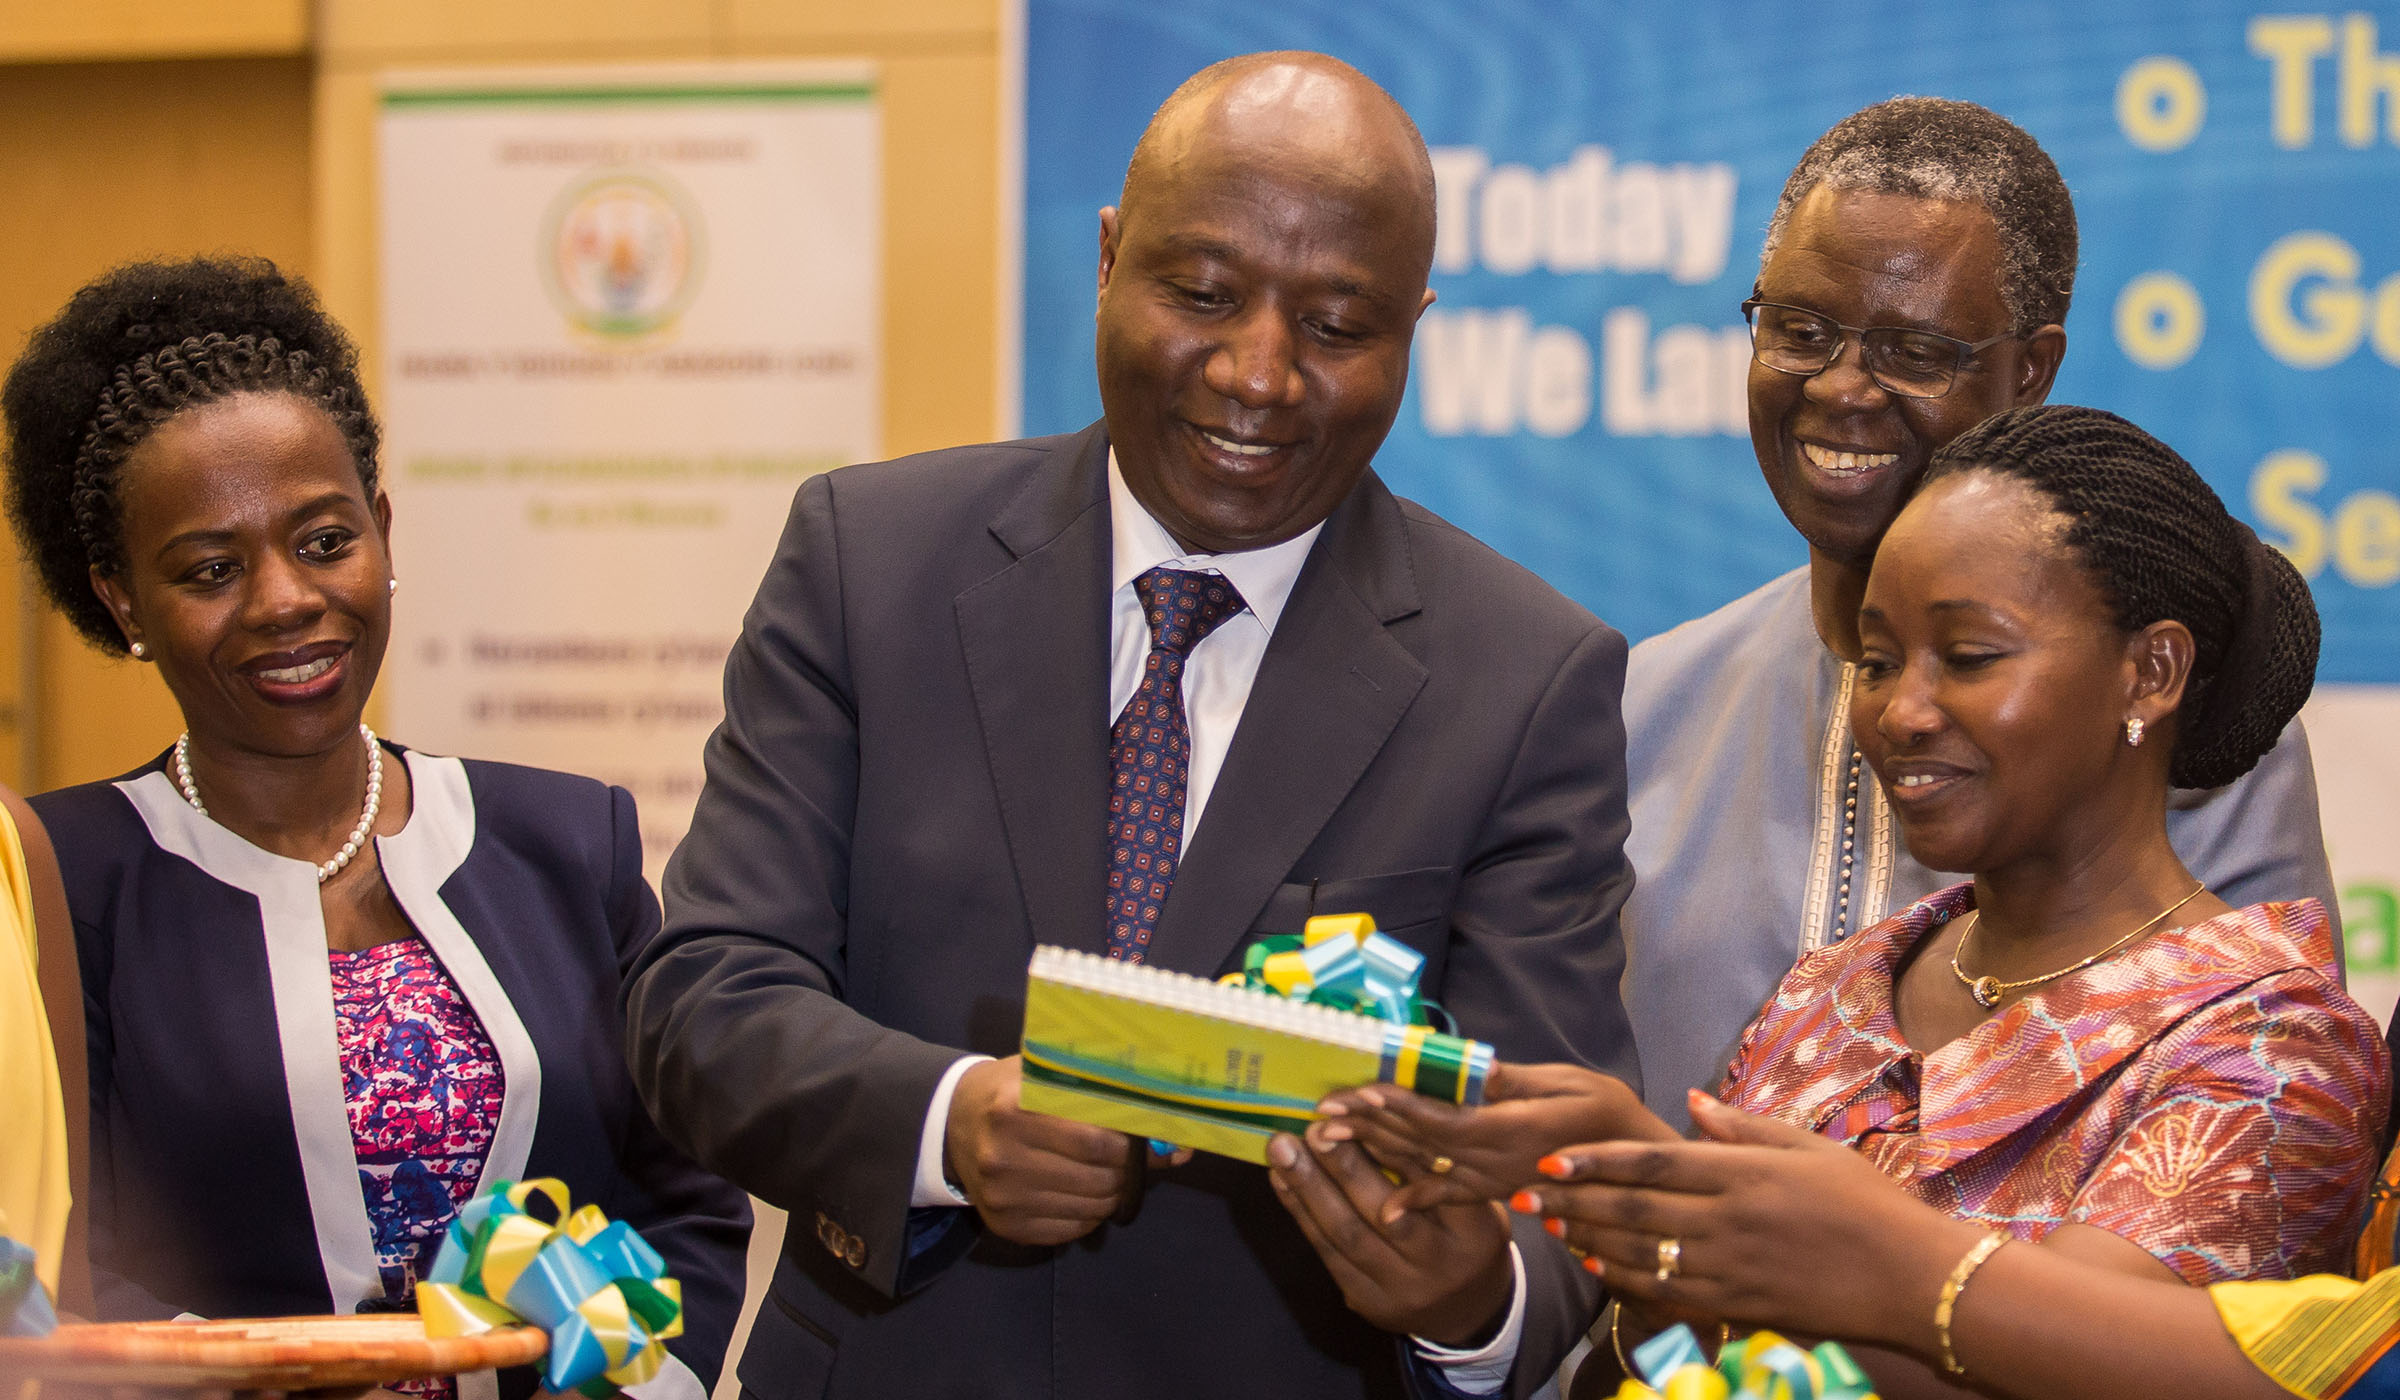 Prime Minister Edouard Ngirente (2nd left) launches a report on the state of gender equality in Rwanda alongside central bank Deputy Governor Monique Nsanzabaganwa (left) Minister for Family and Gender Promotion Solina Nyirahabimana (right) and Fodu00e9 Ndiaye, the UN Resident Coordinator. The index shows significant gains in Rwandau2019s efforts to promote gender equality. Nadege Imbabazi.